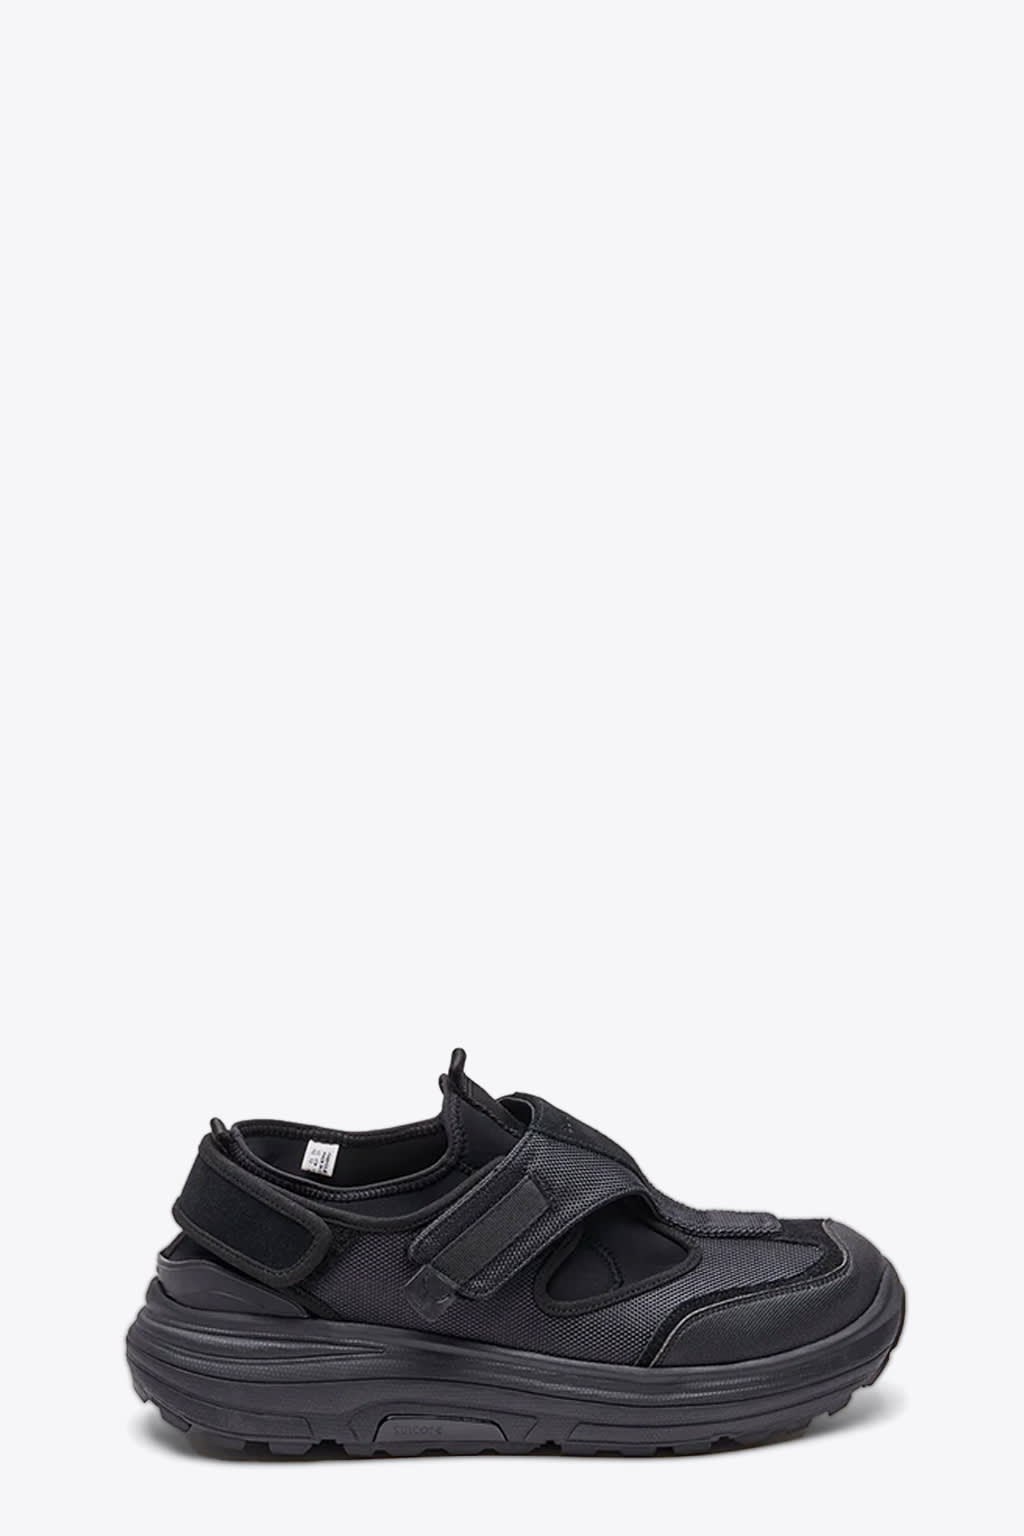 SUICOKE TRED BLACK LAYERED LOW SNEAKER - TRED